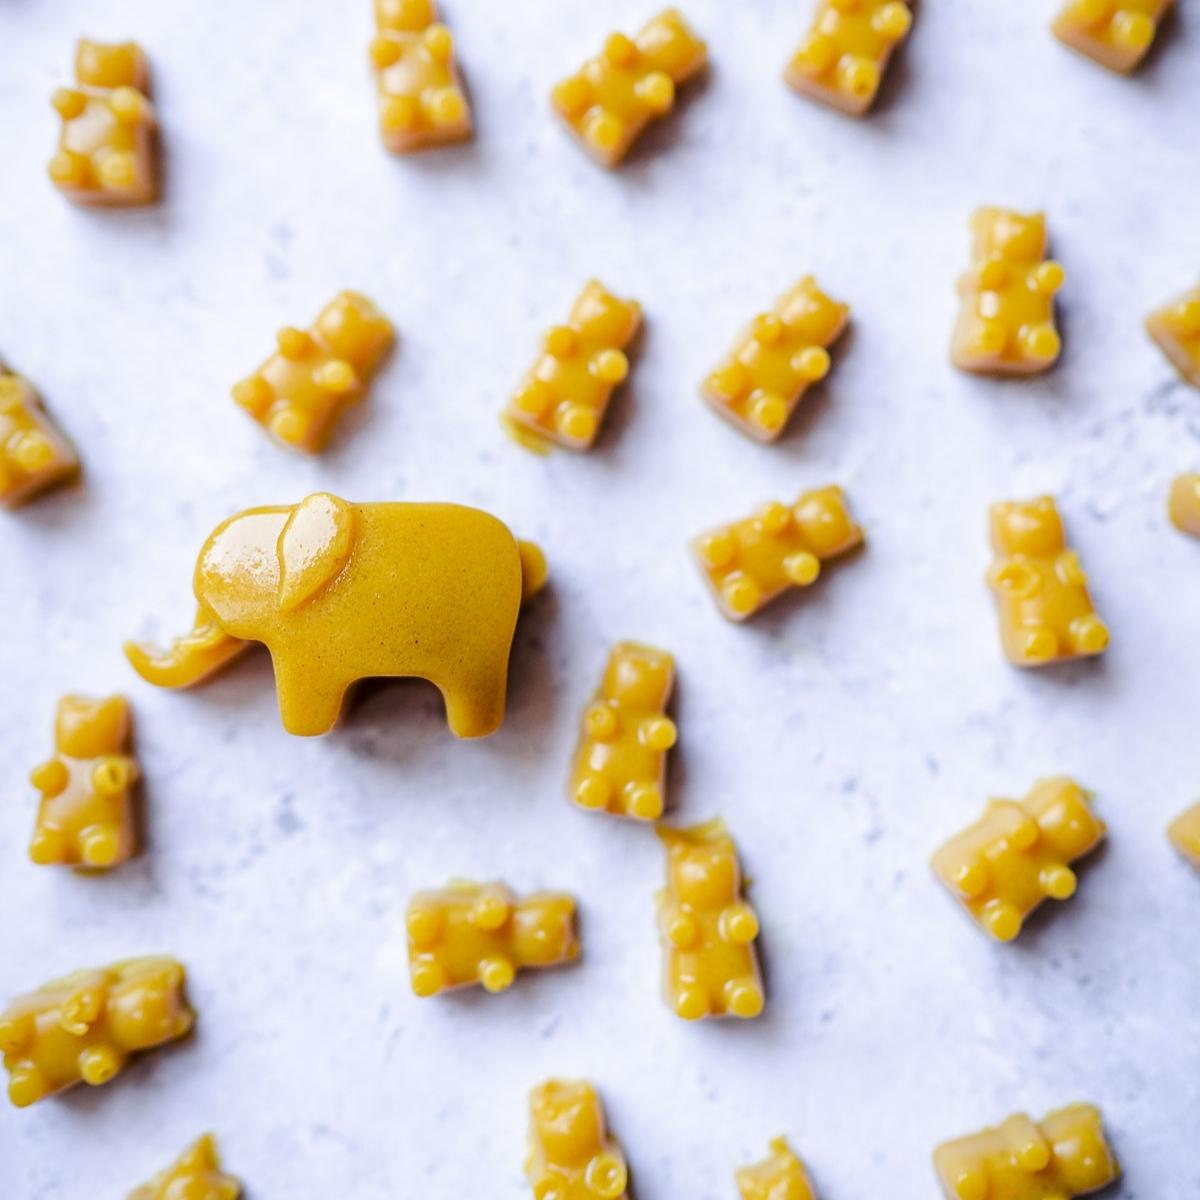 Close shot of a yellow elephant gummy and several yellow gummy bears.